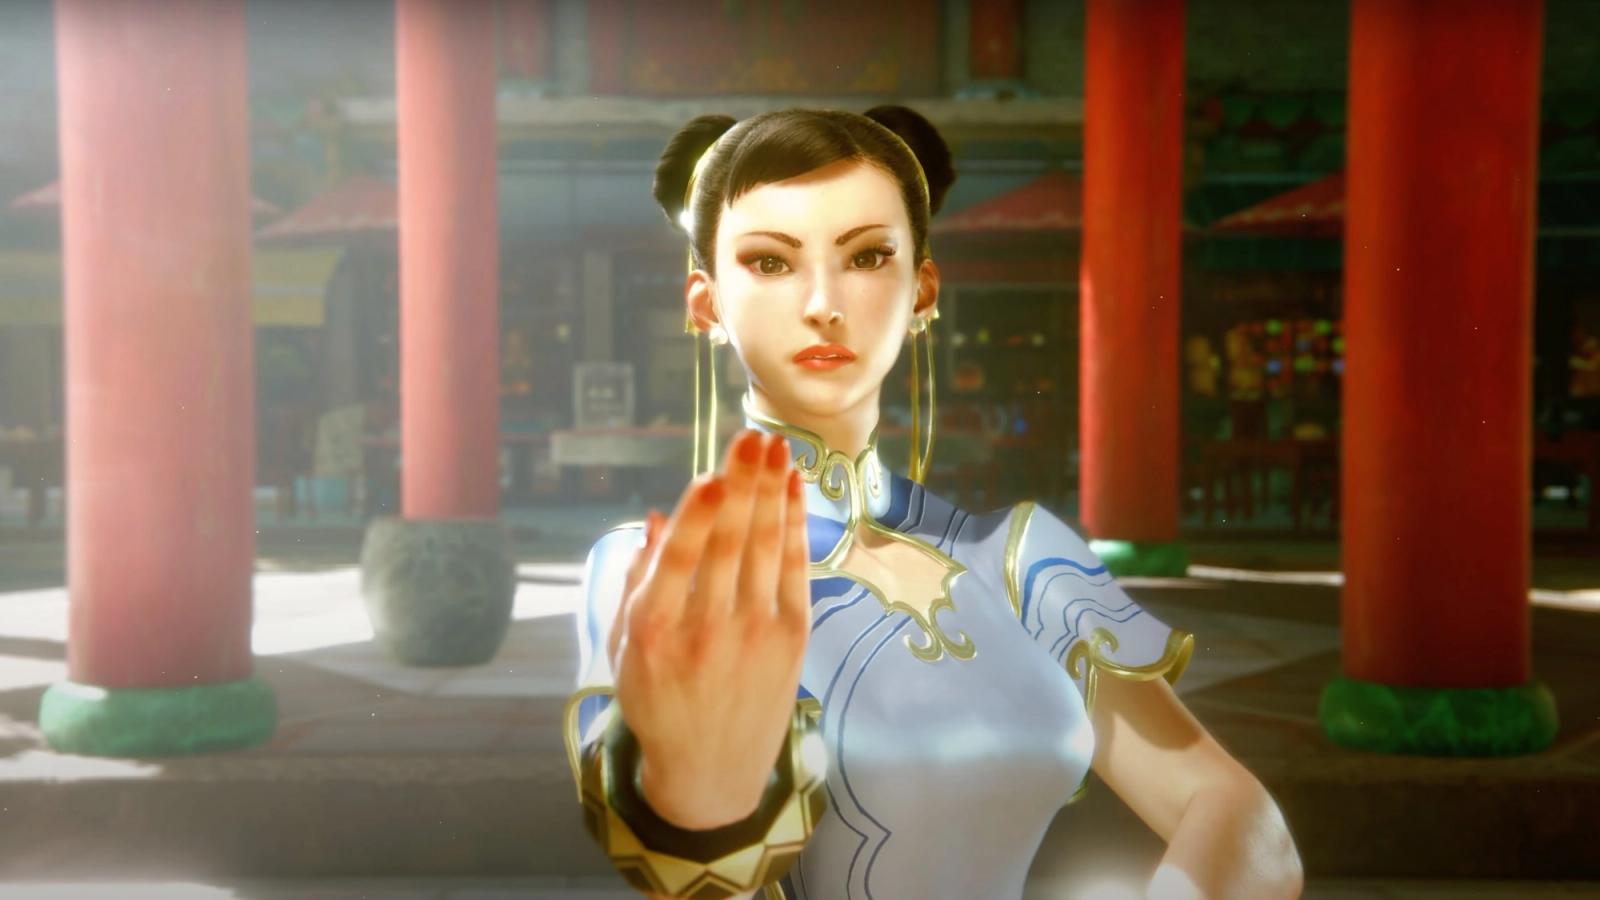 Chun-Li is getting ready for the fight.